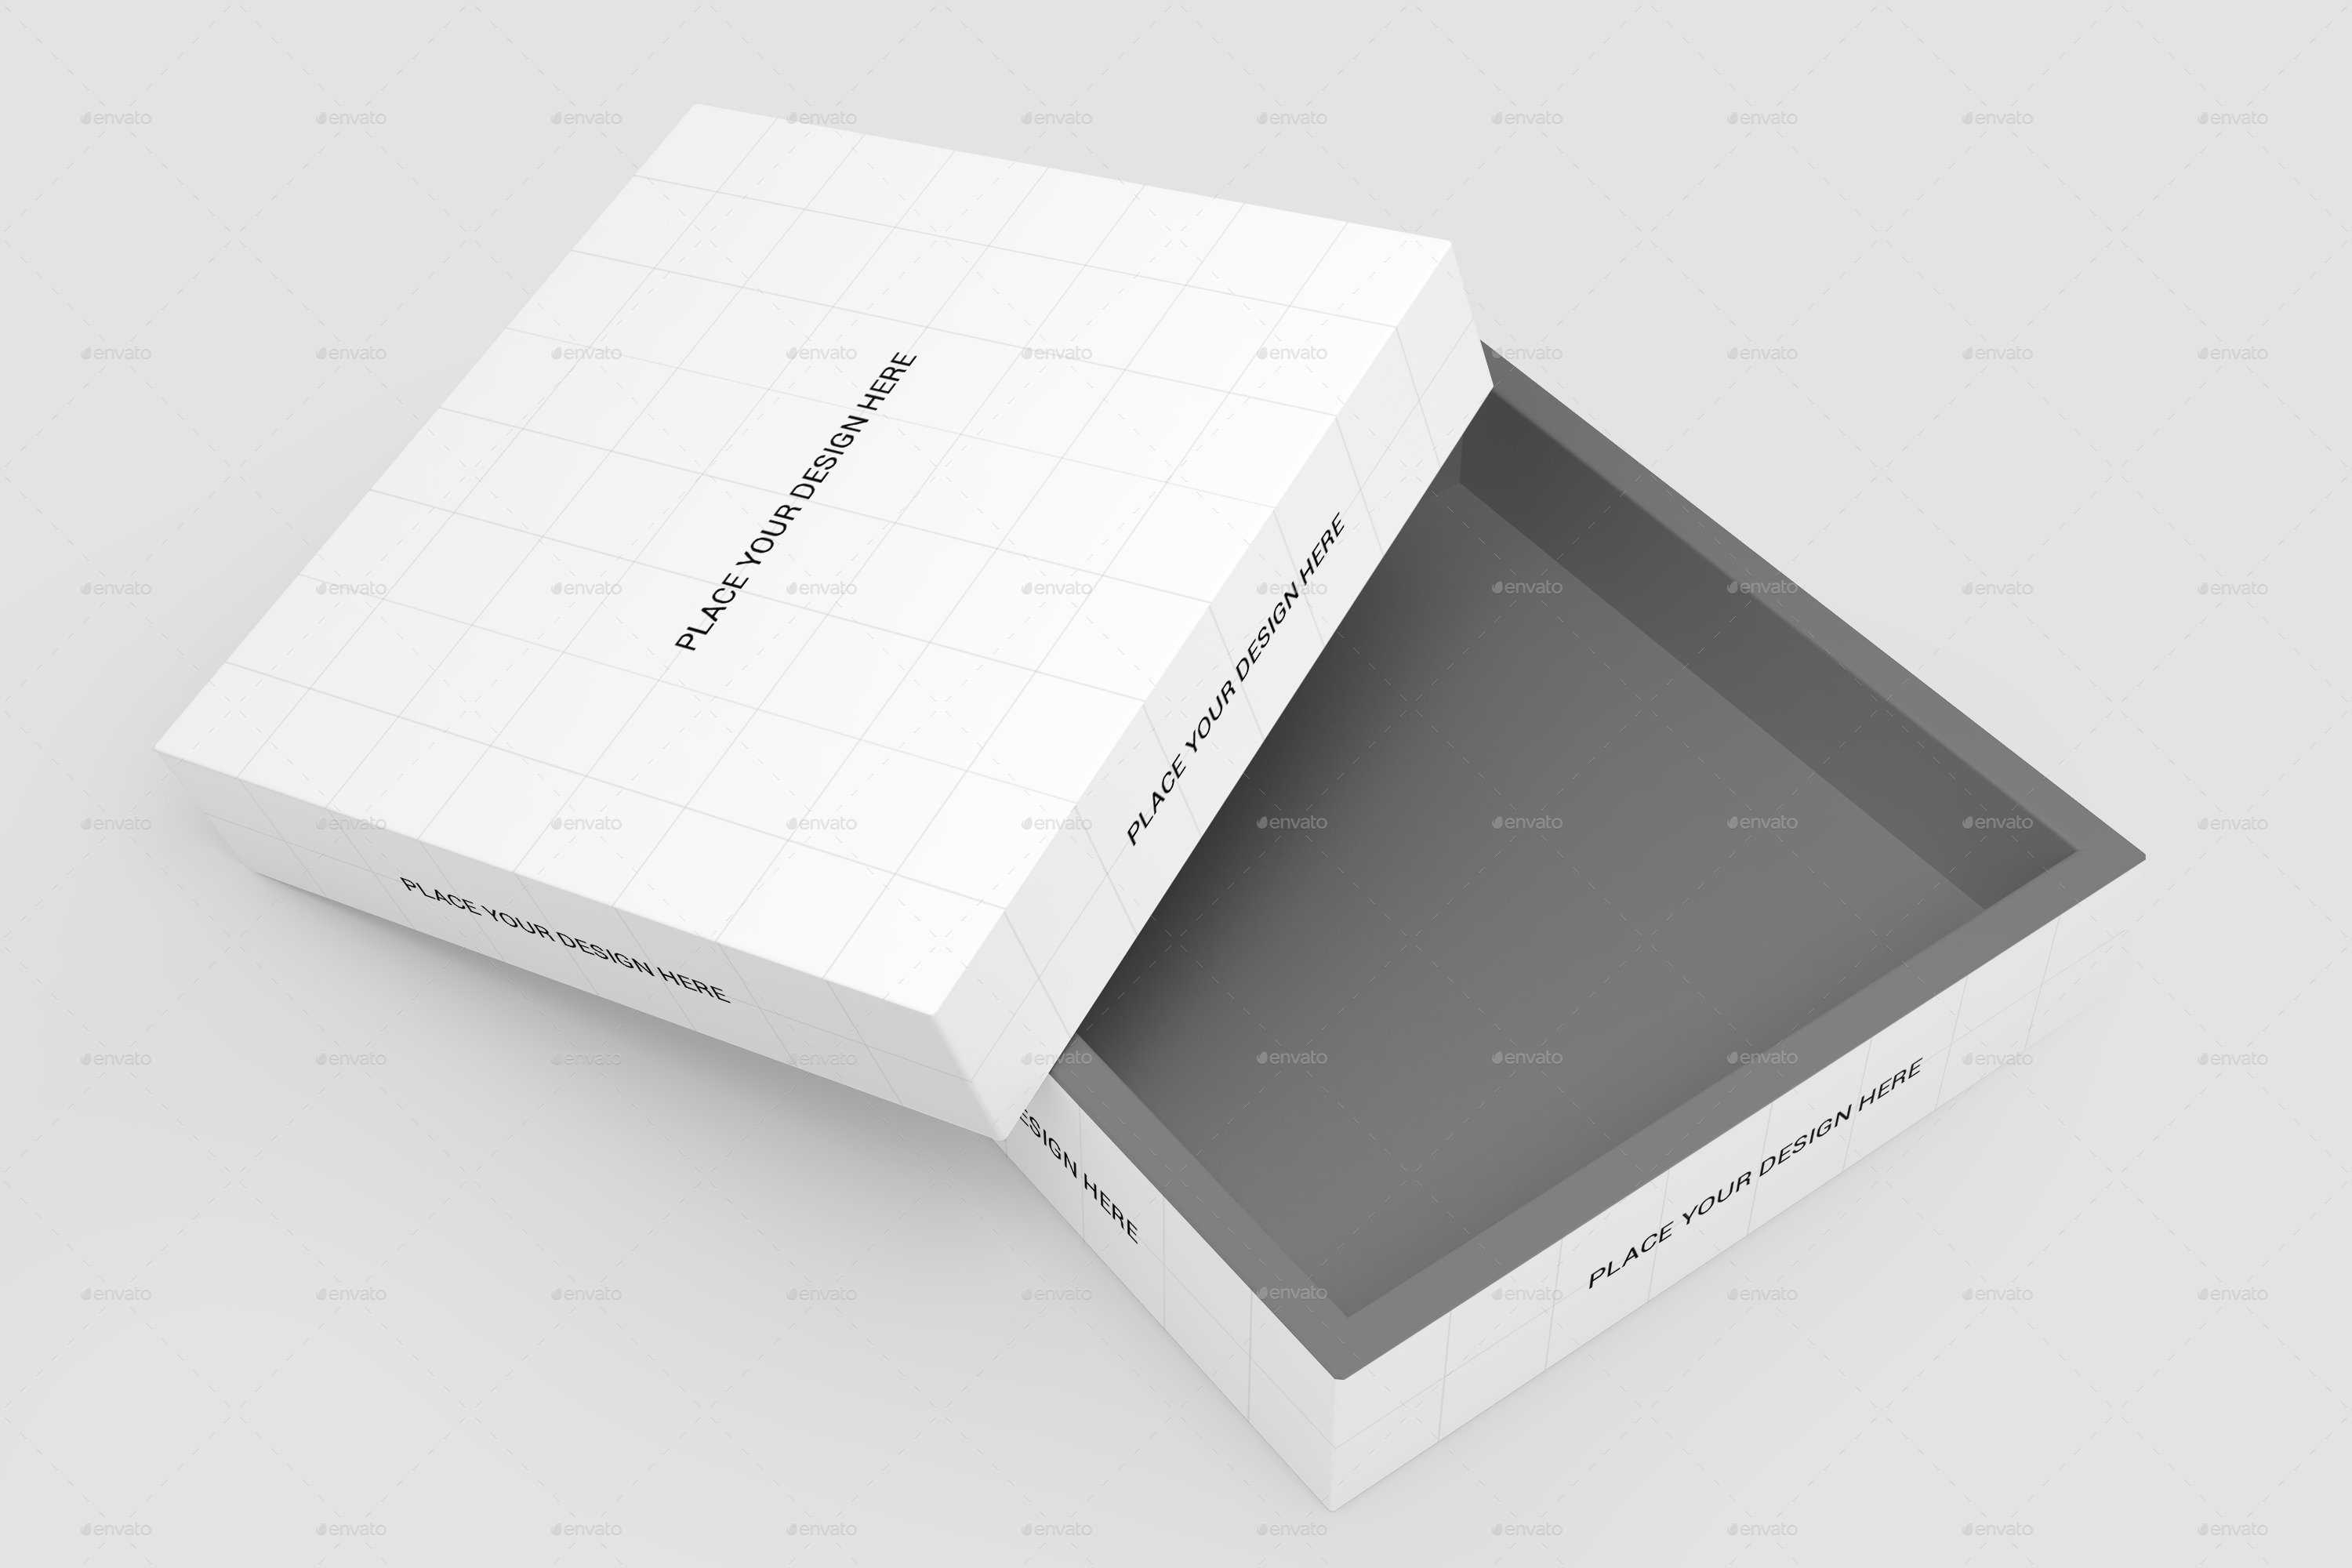 Square Box Packaging Mockups by shaikerintu | GraphicRiver